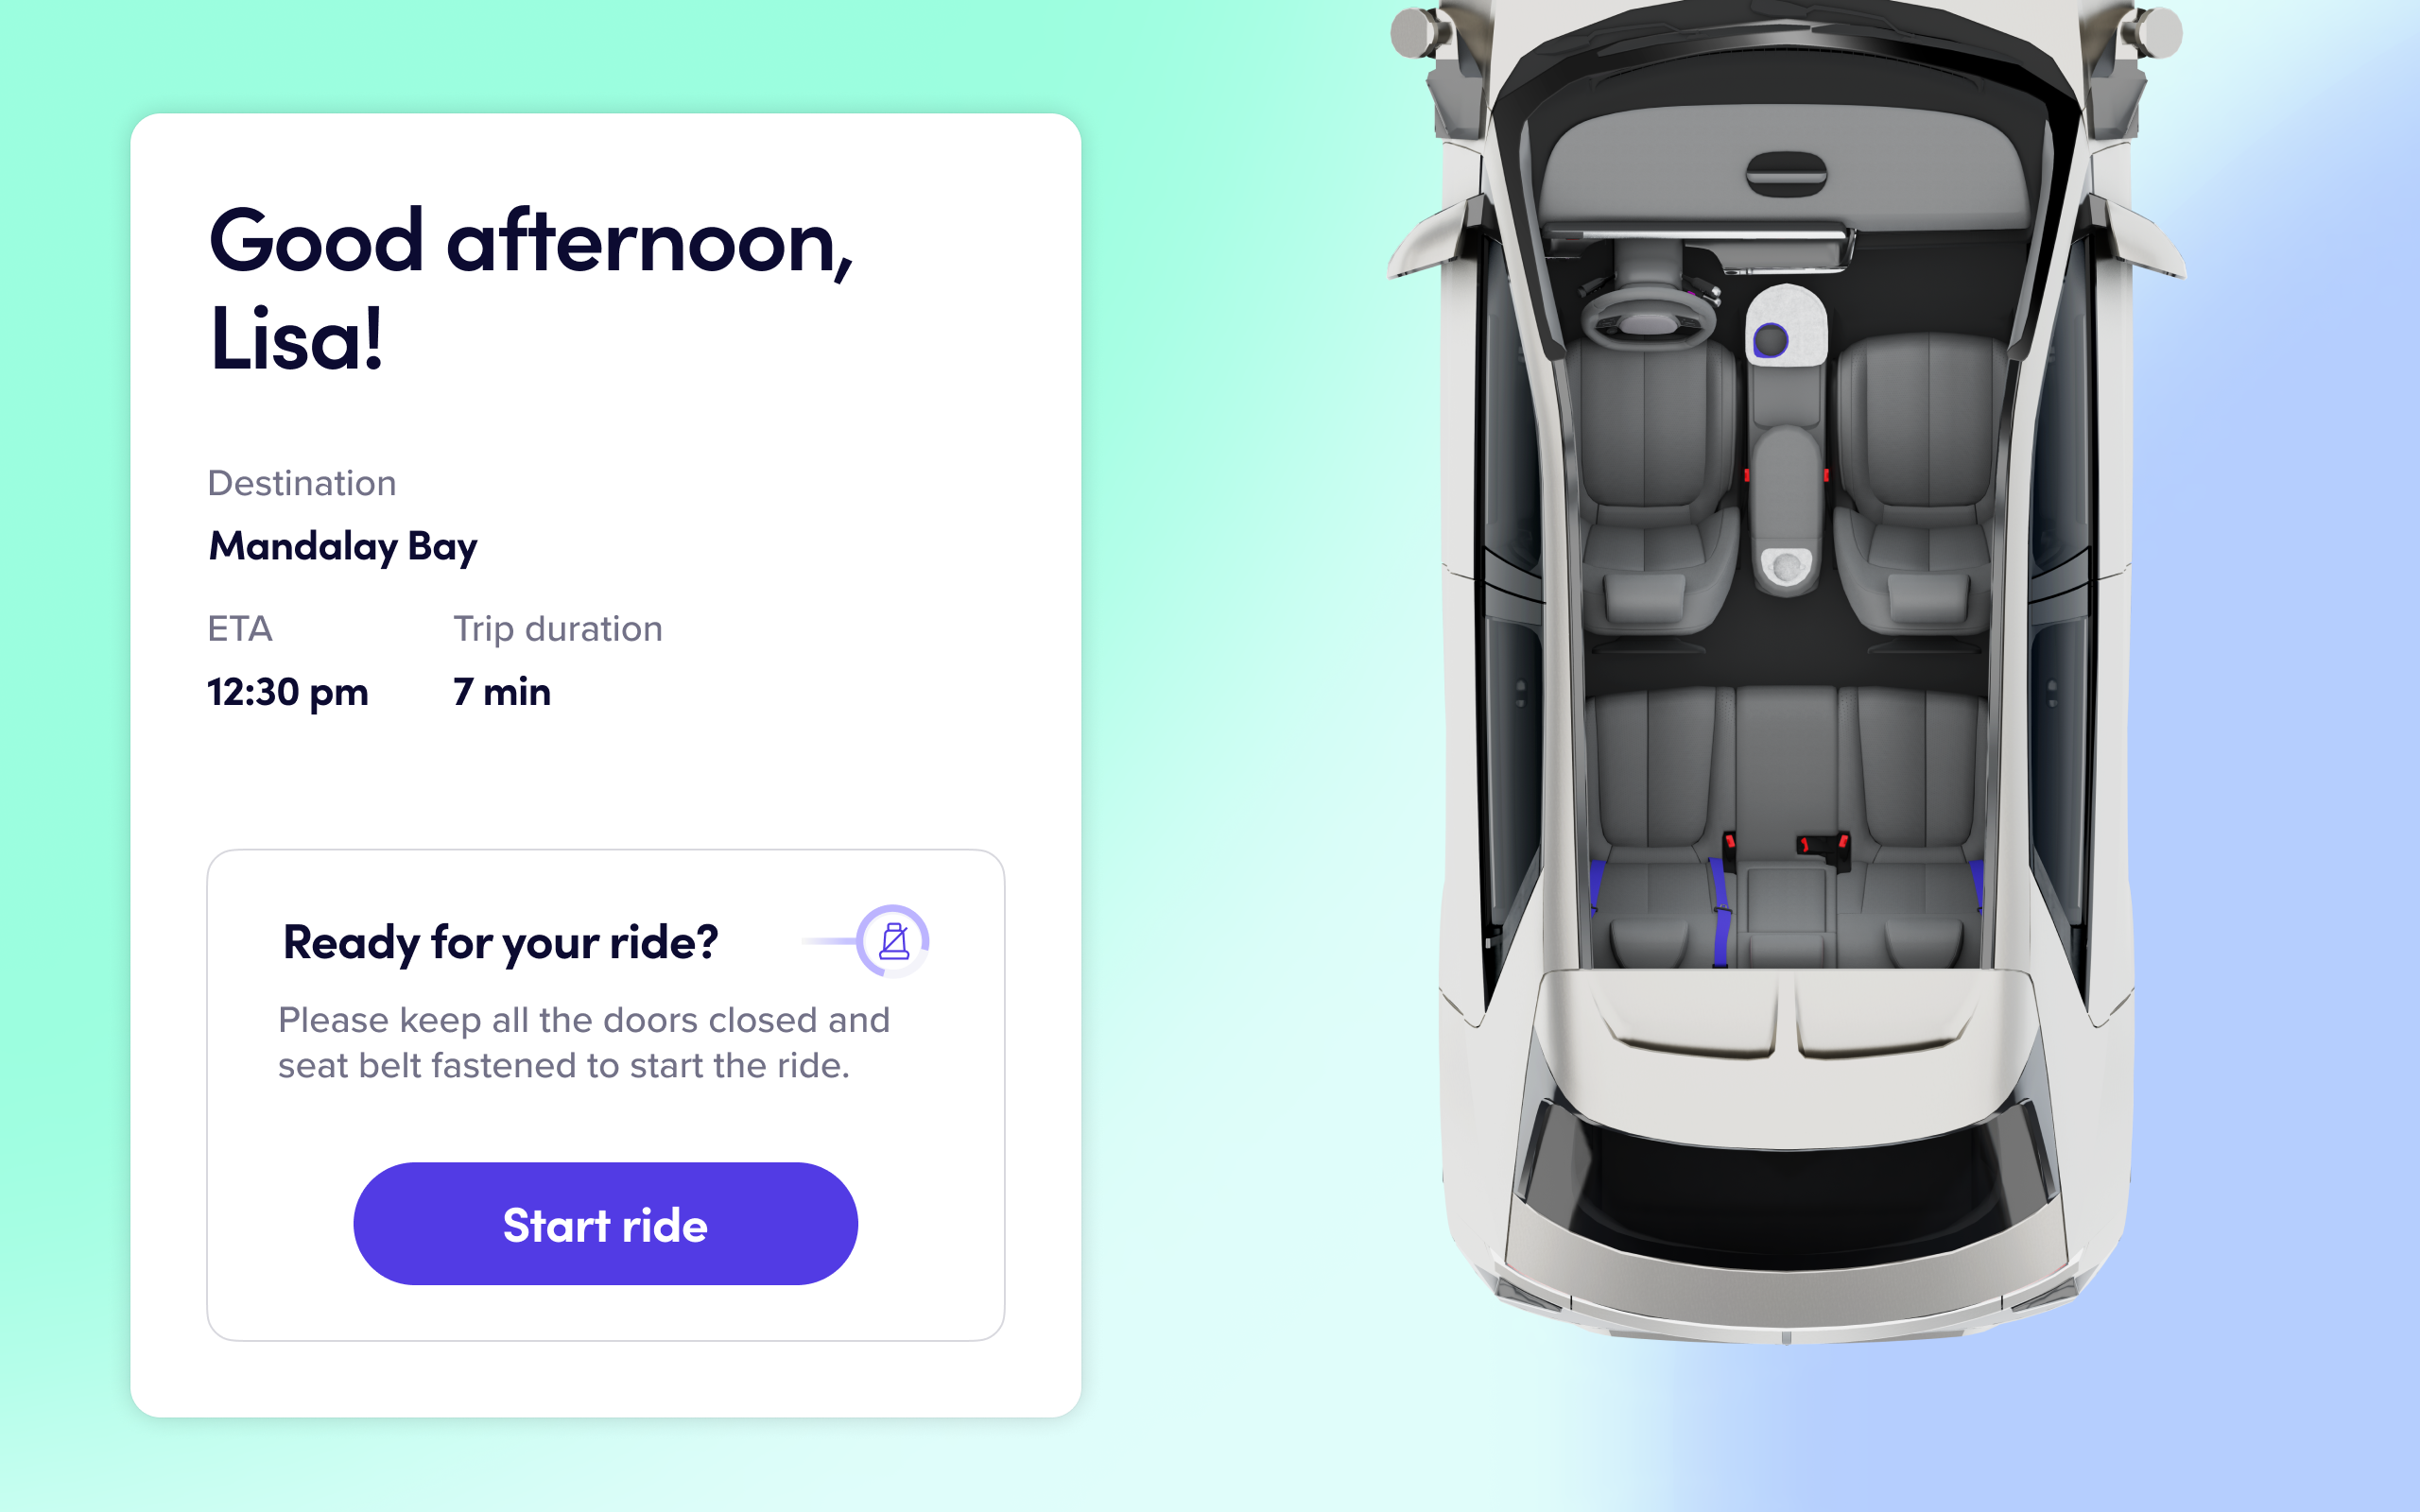 An image of the Lyft app with a welcome message on the left and a view of the IONIQ 5 robotaxi on the right